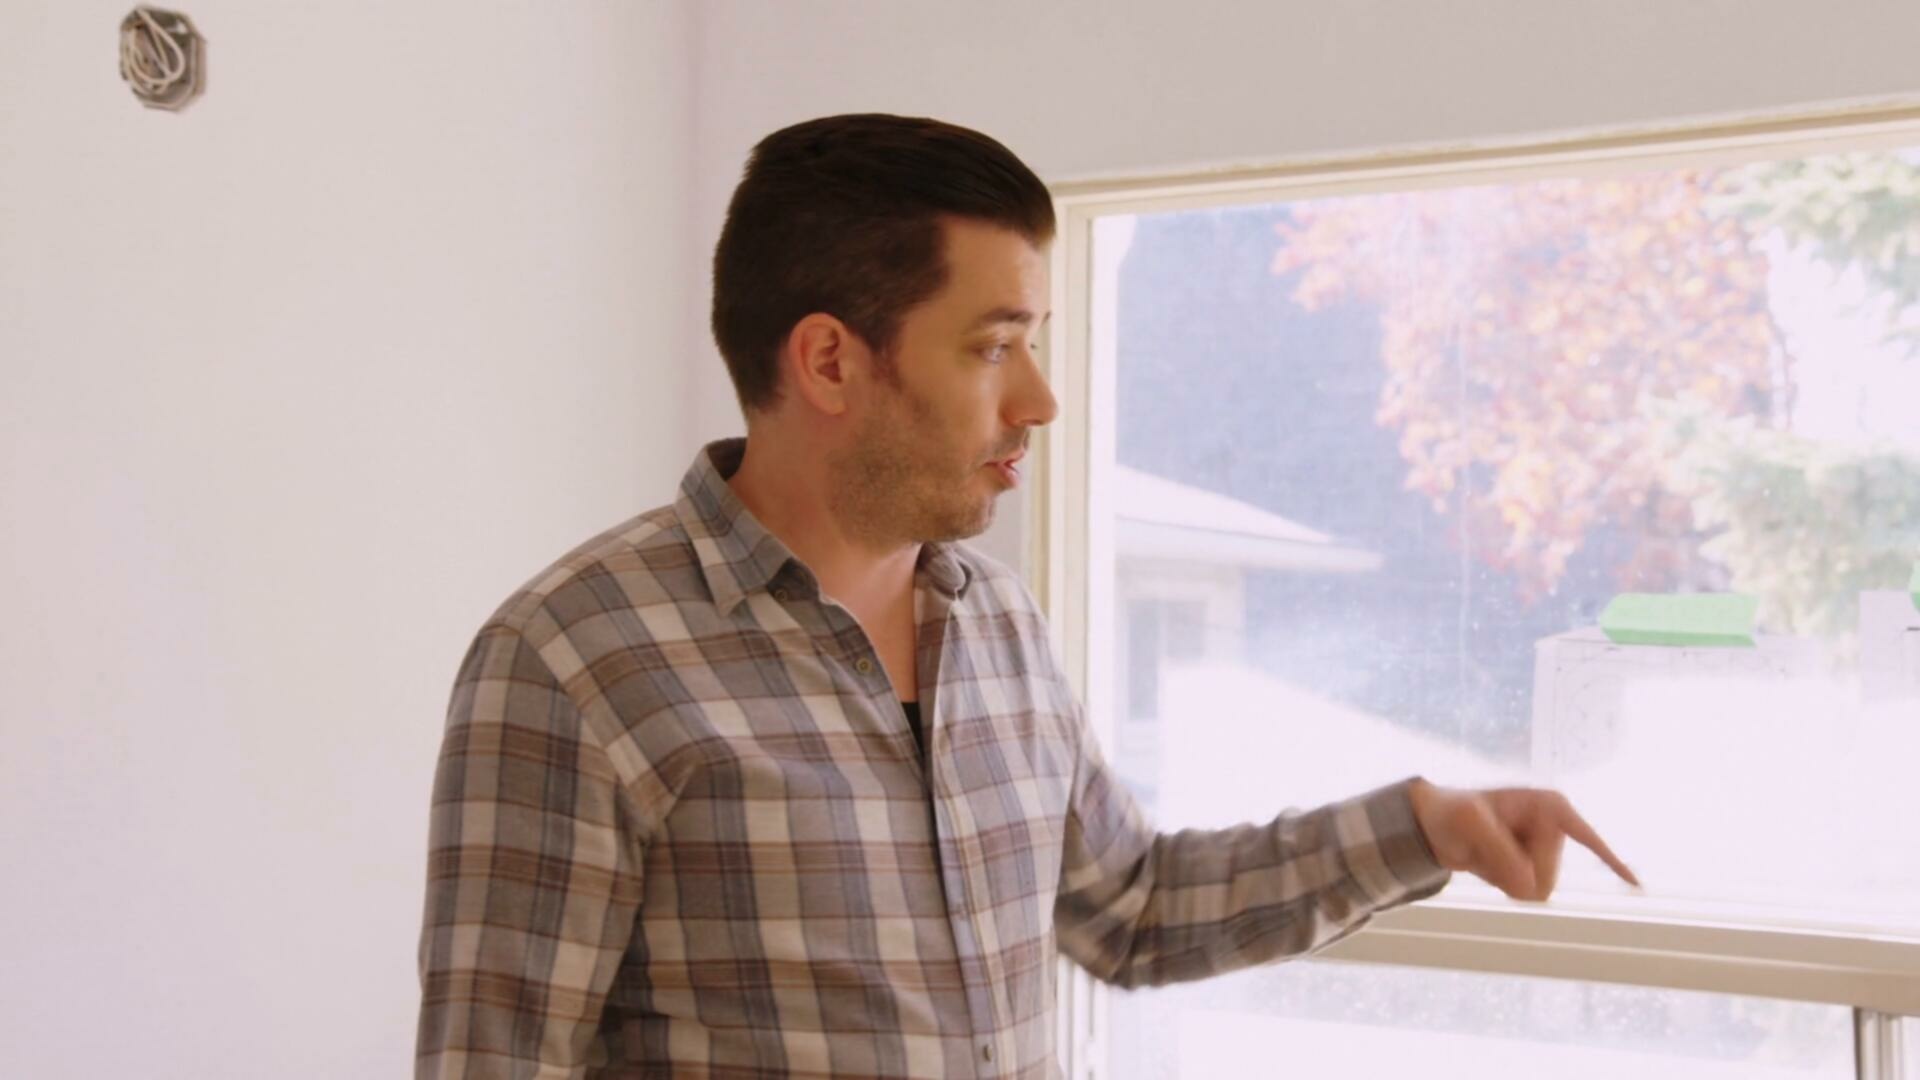 Property Brothers S14E03 The Homesick Cure 1080p MAX WEB DL DDP2 0 H 264 NTb TGx